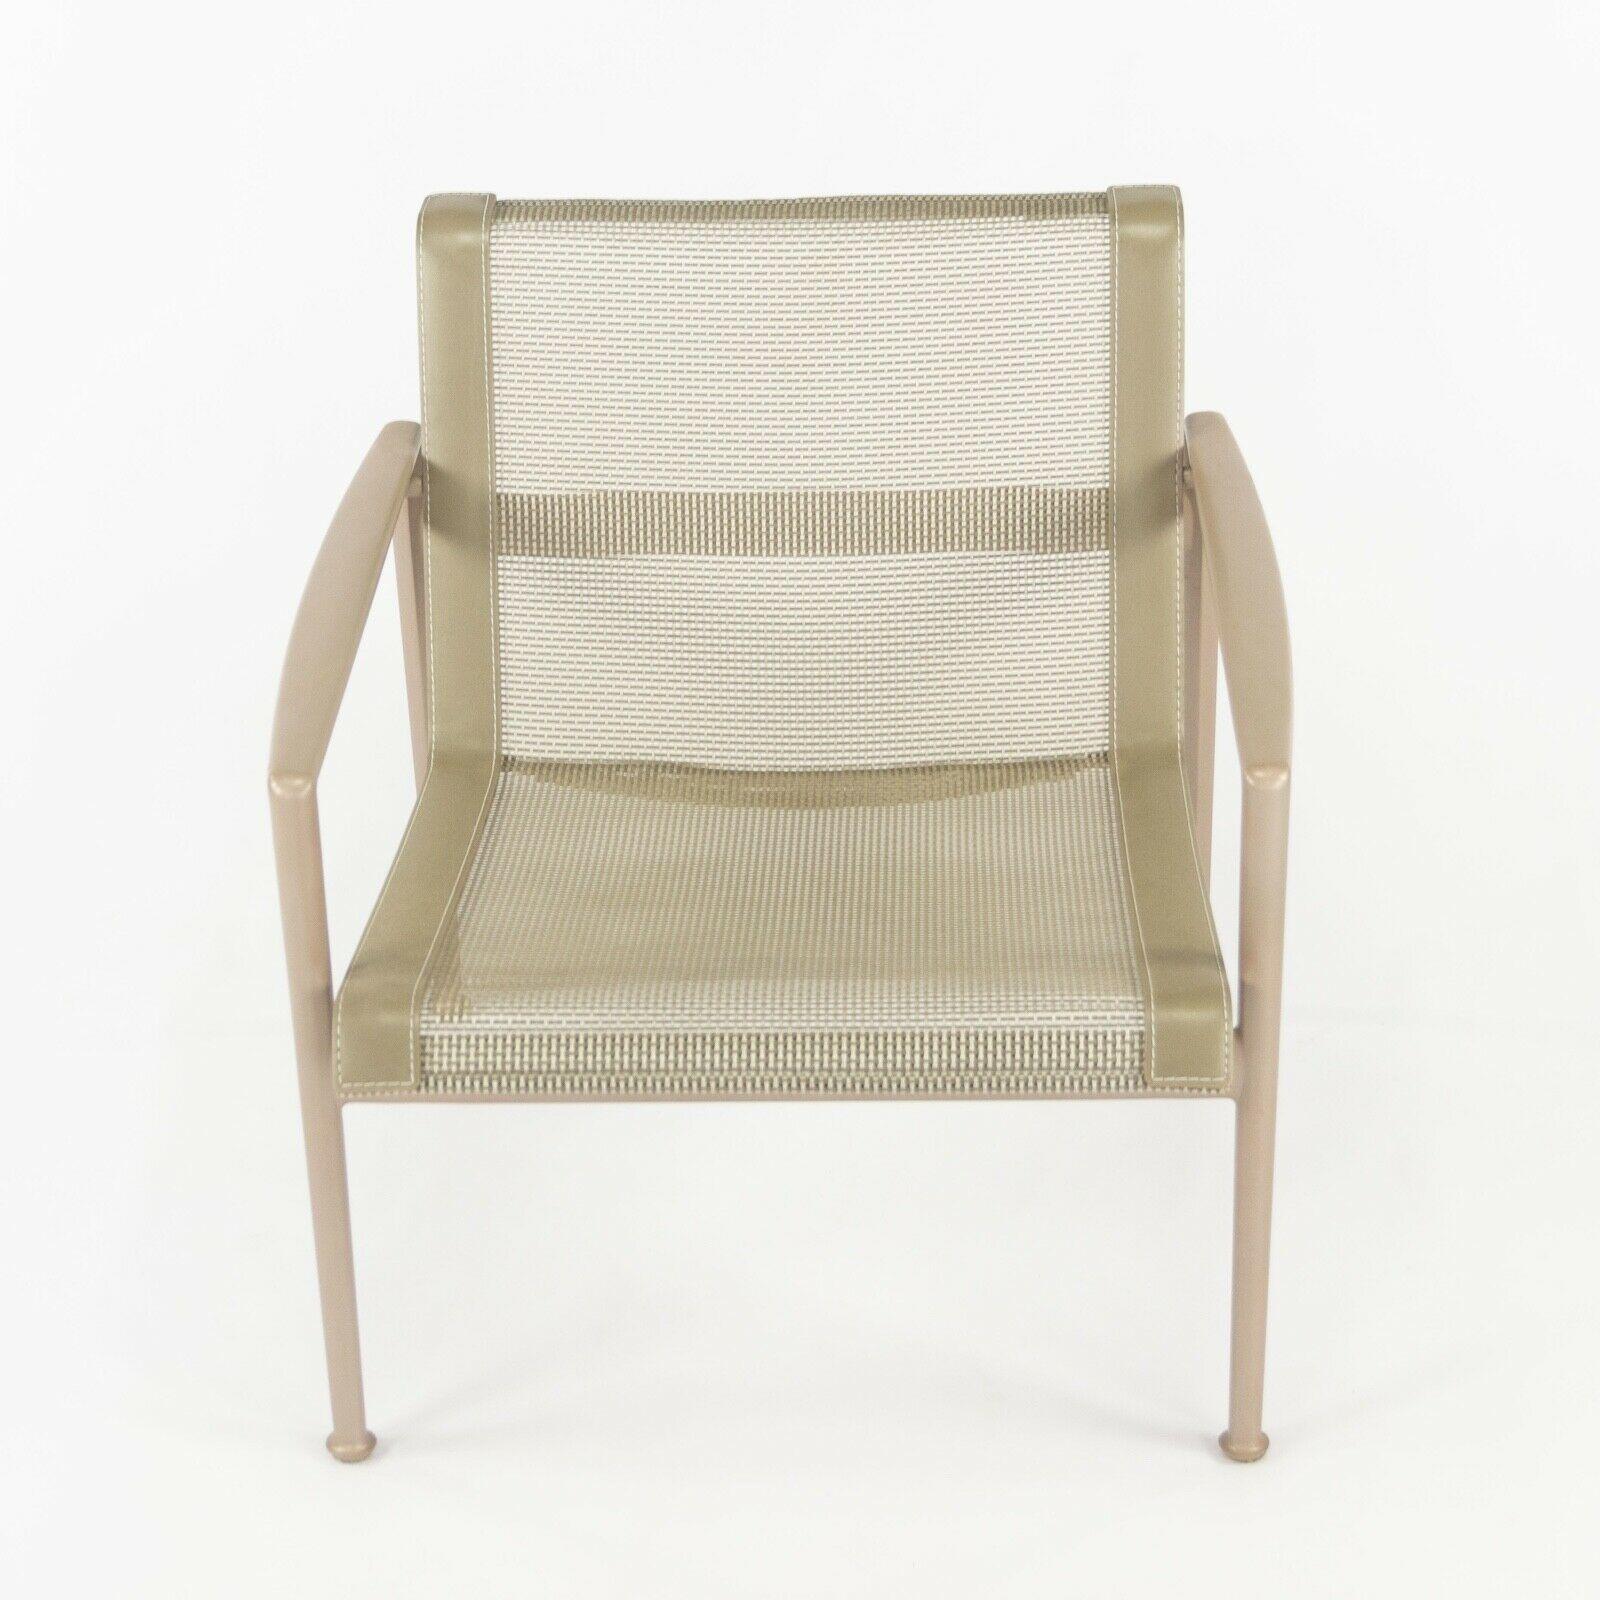 2020 Knoll Richard Schultz 1966 Series Outdoor Lounge Chair w/ Arm & Beige Frame For Sale 3